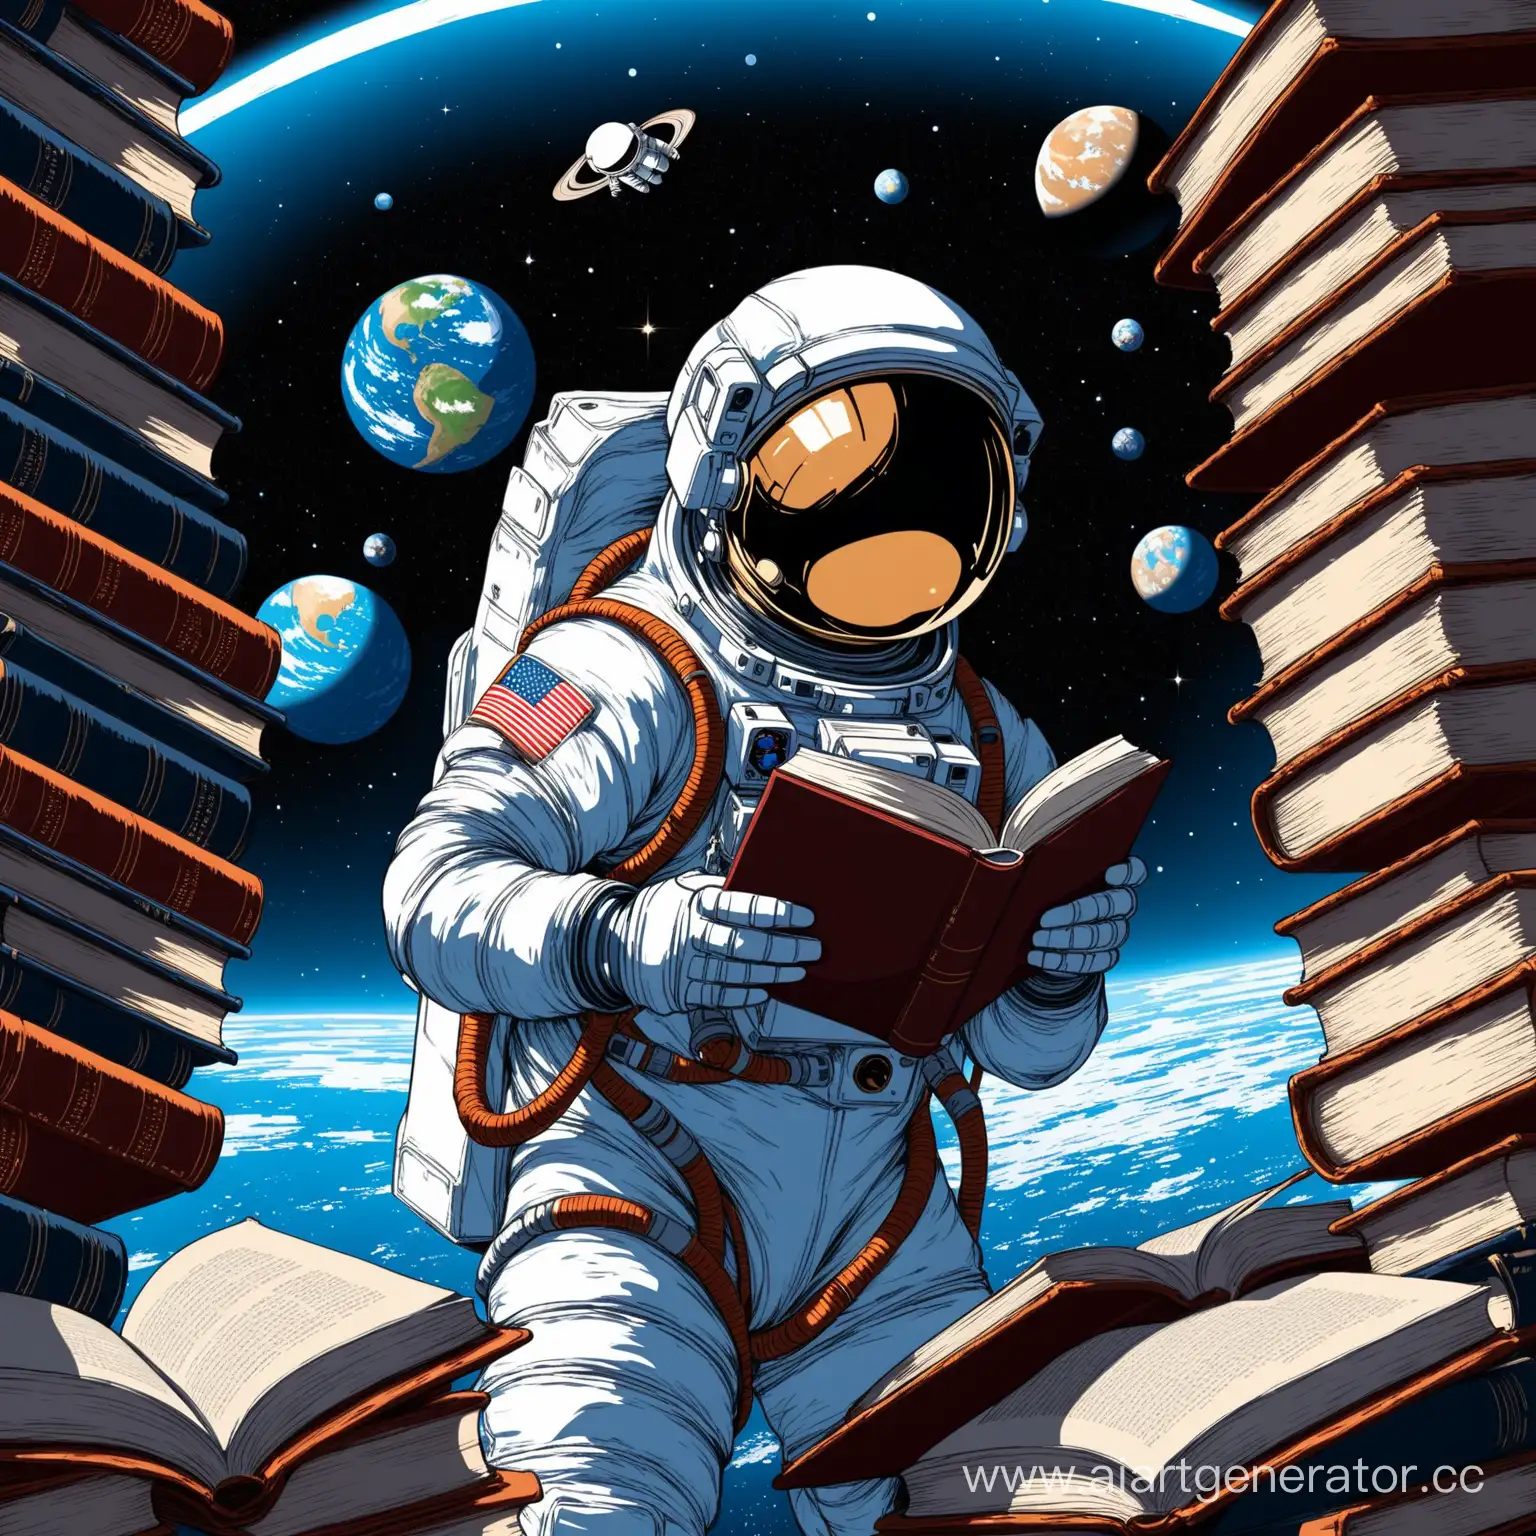 Astronaut-Reading-in-Space-Surrounded-by-Books